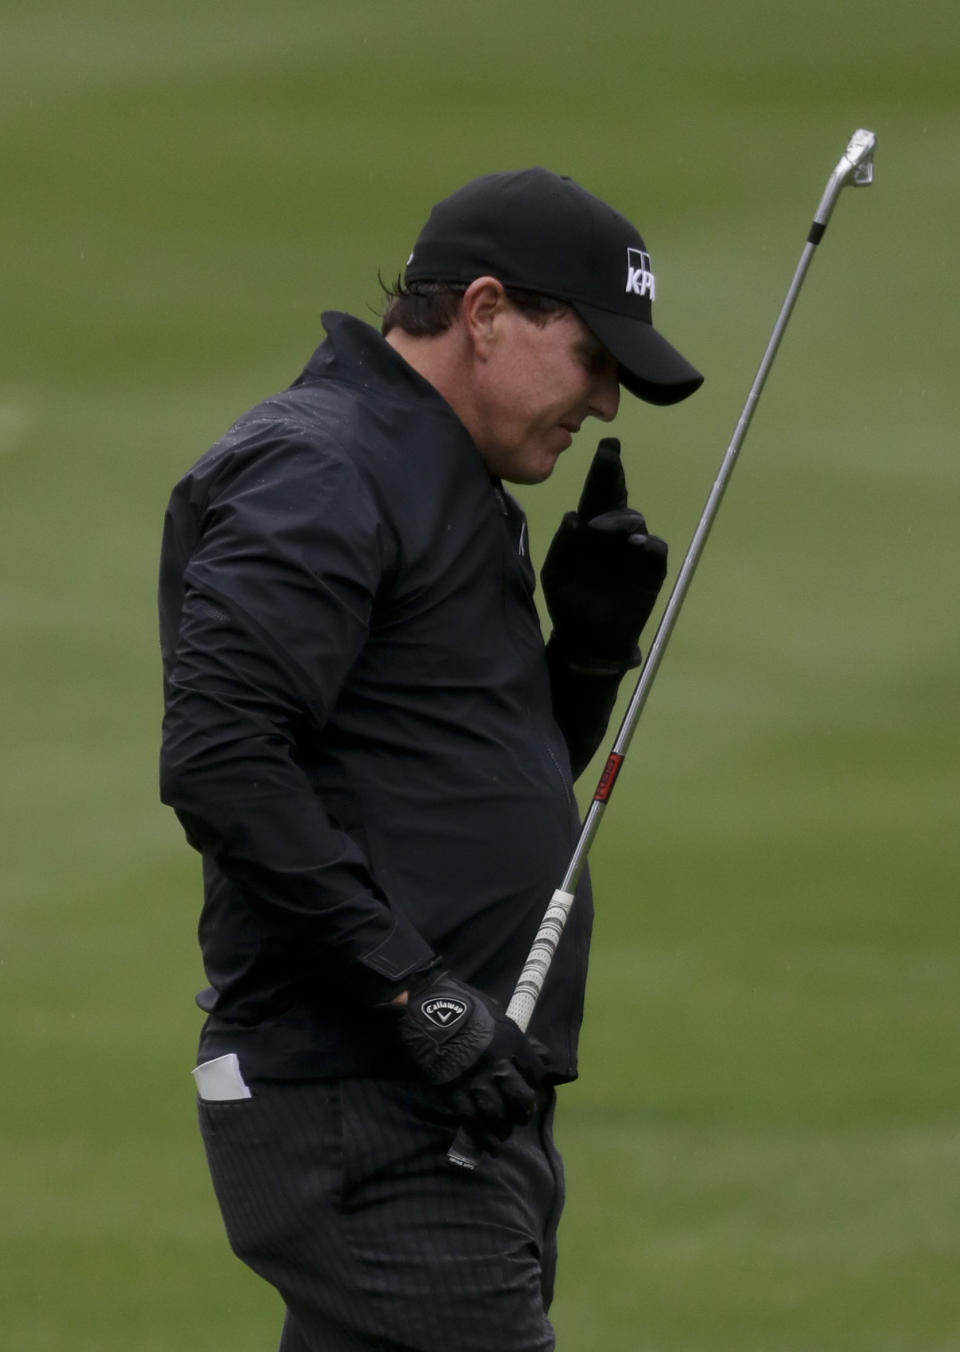 Phil Mickelson reacts to his chip to the second green during the first round of the CareerBuilder Challenge at the La Quinta County Club Thursday, Jan. 19, 2017 in La Quinta, Calif. (AP Photo/Chris Carlson)